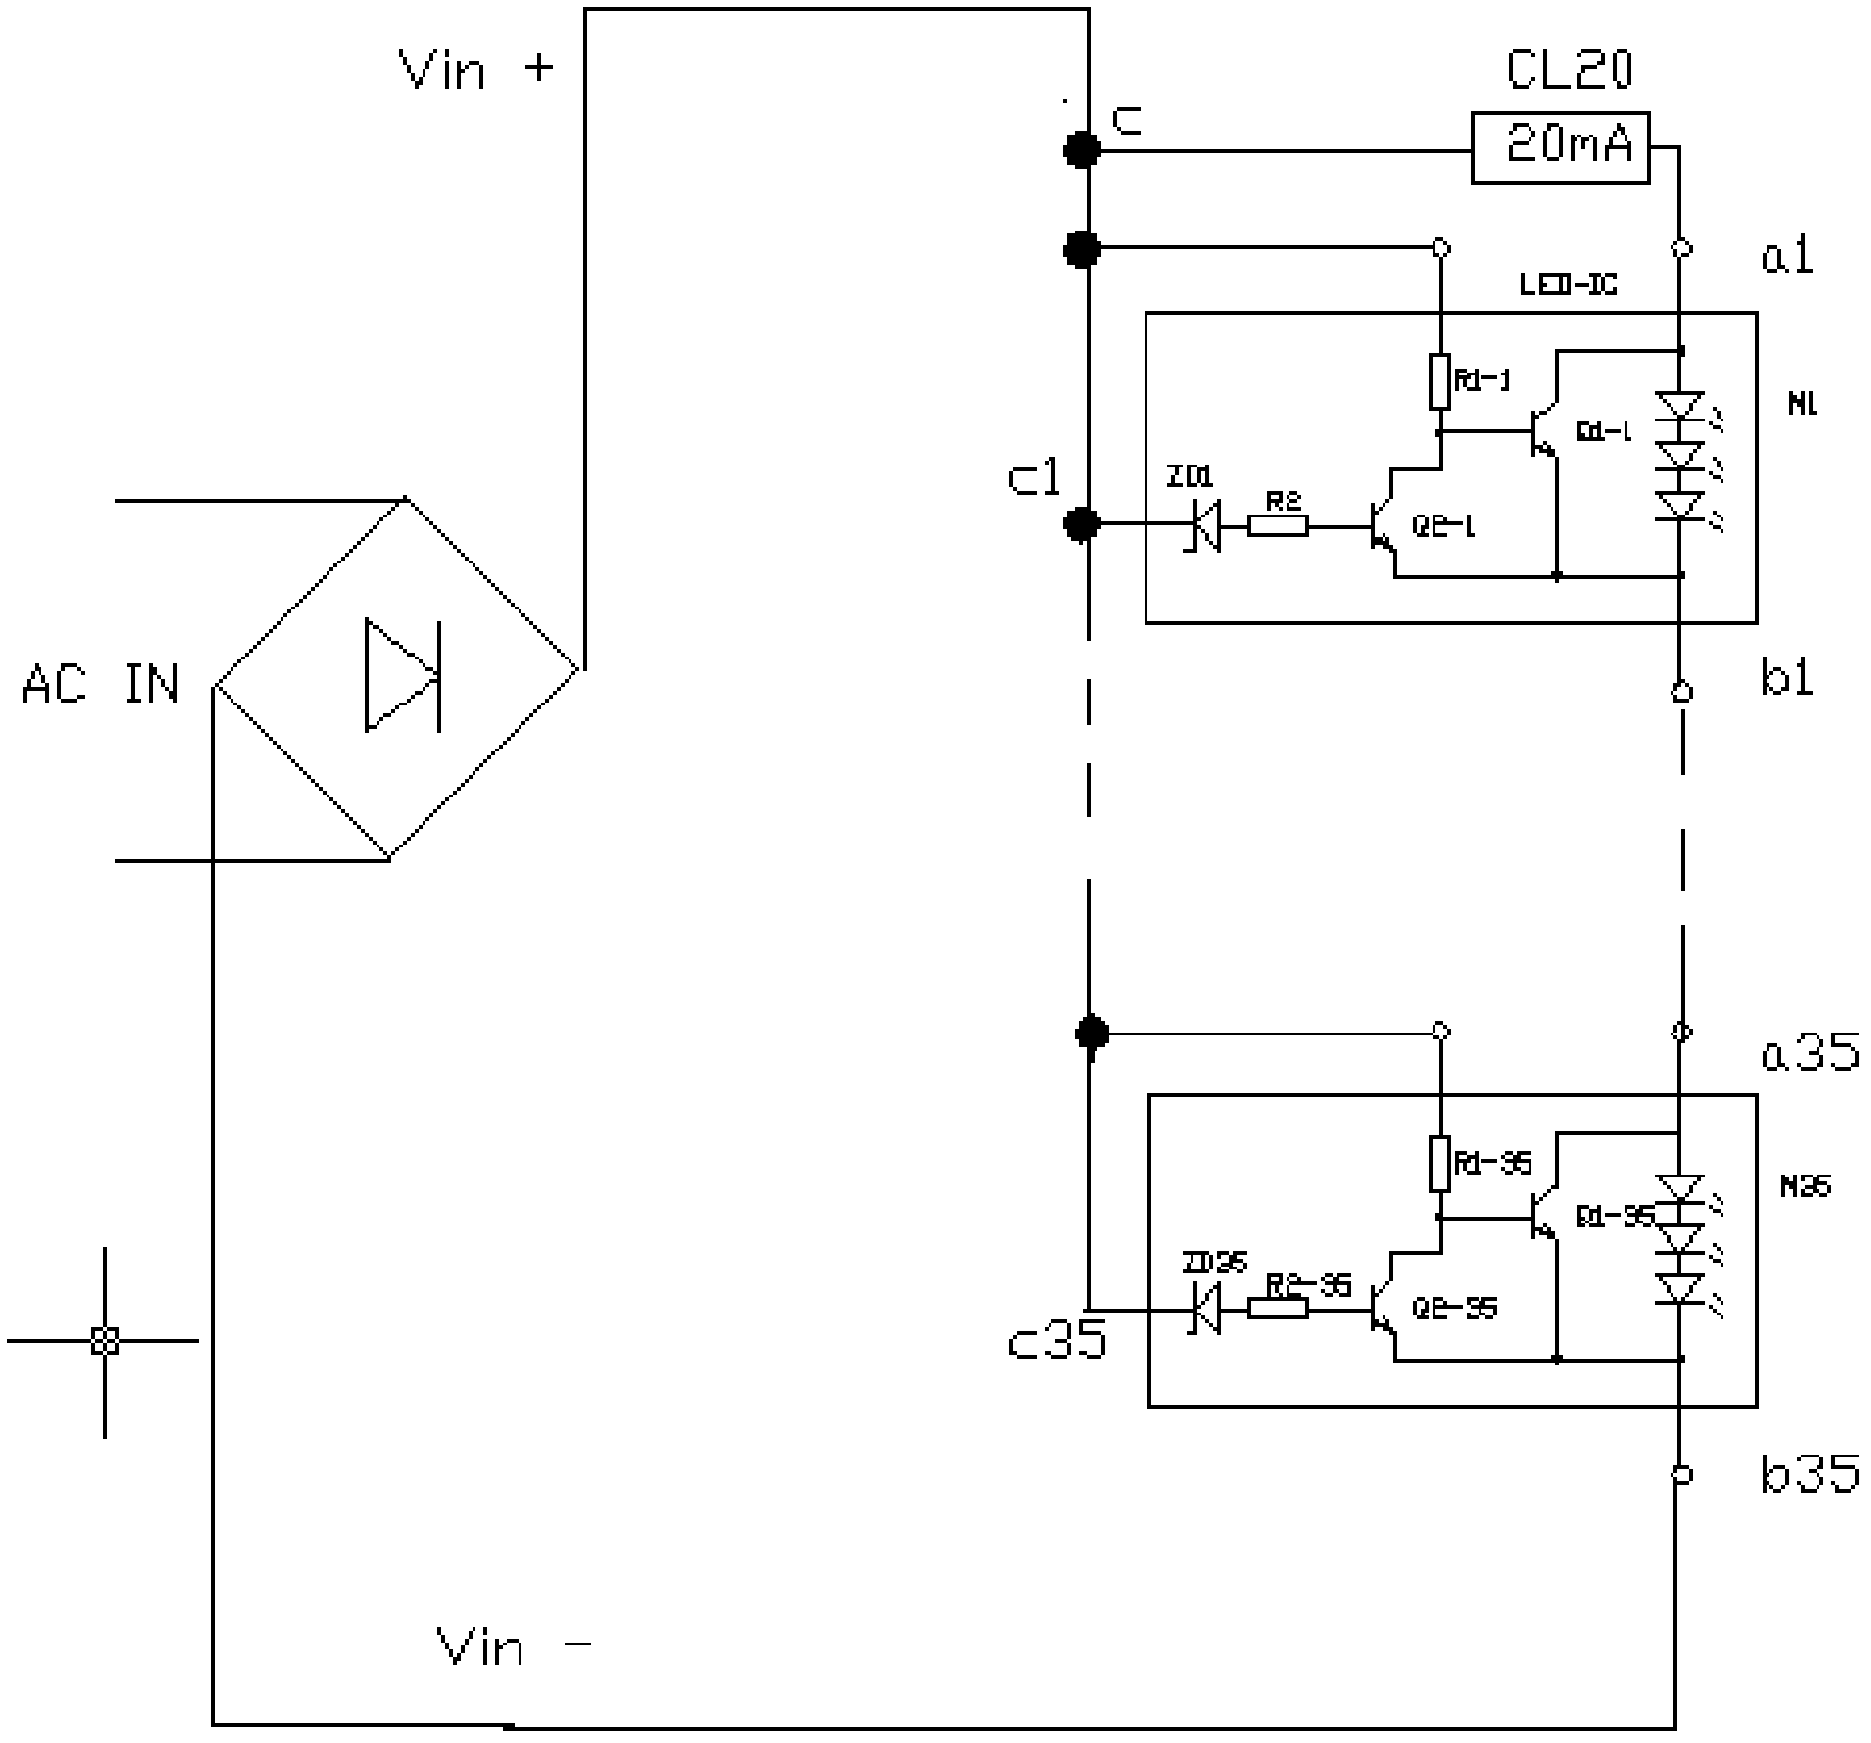 LED working mode control apparatus